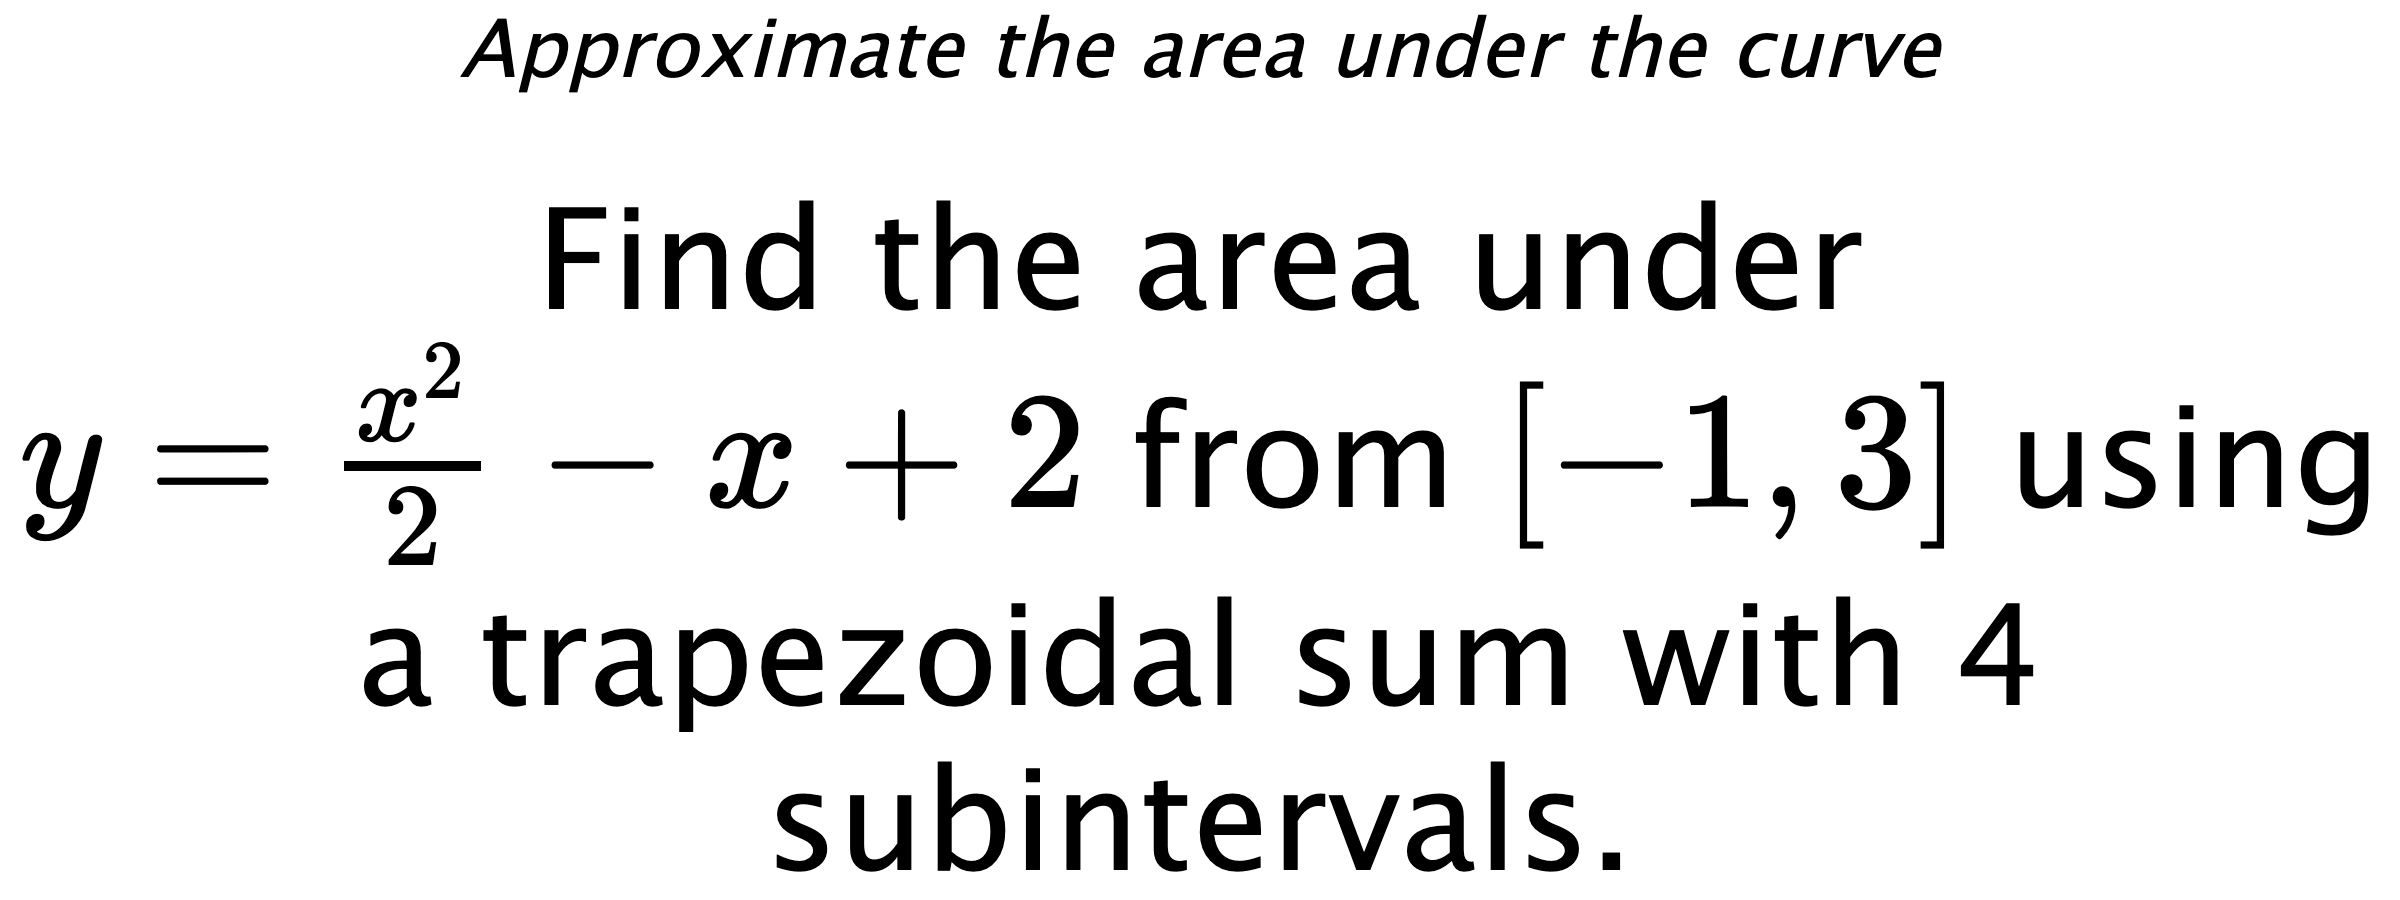 Approximate the area under the curve Find the area under $ y=\frac{x^2}{2}-x+2 $ from $ [-1,3] $ using a trapezoidal sum with 4 subintervals.